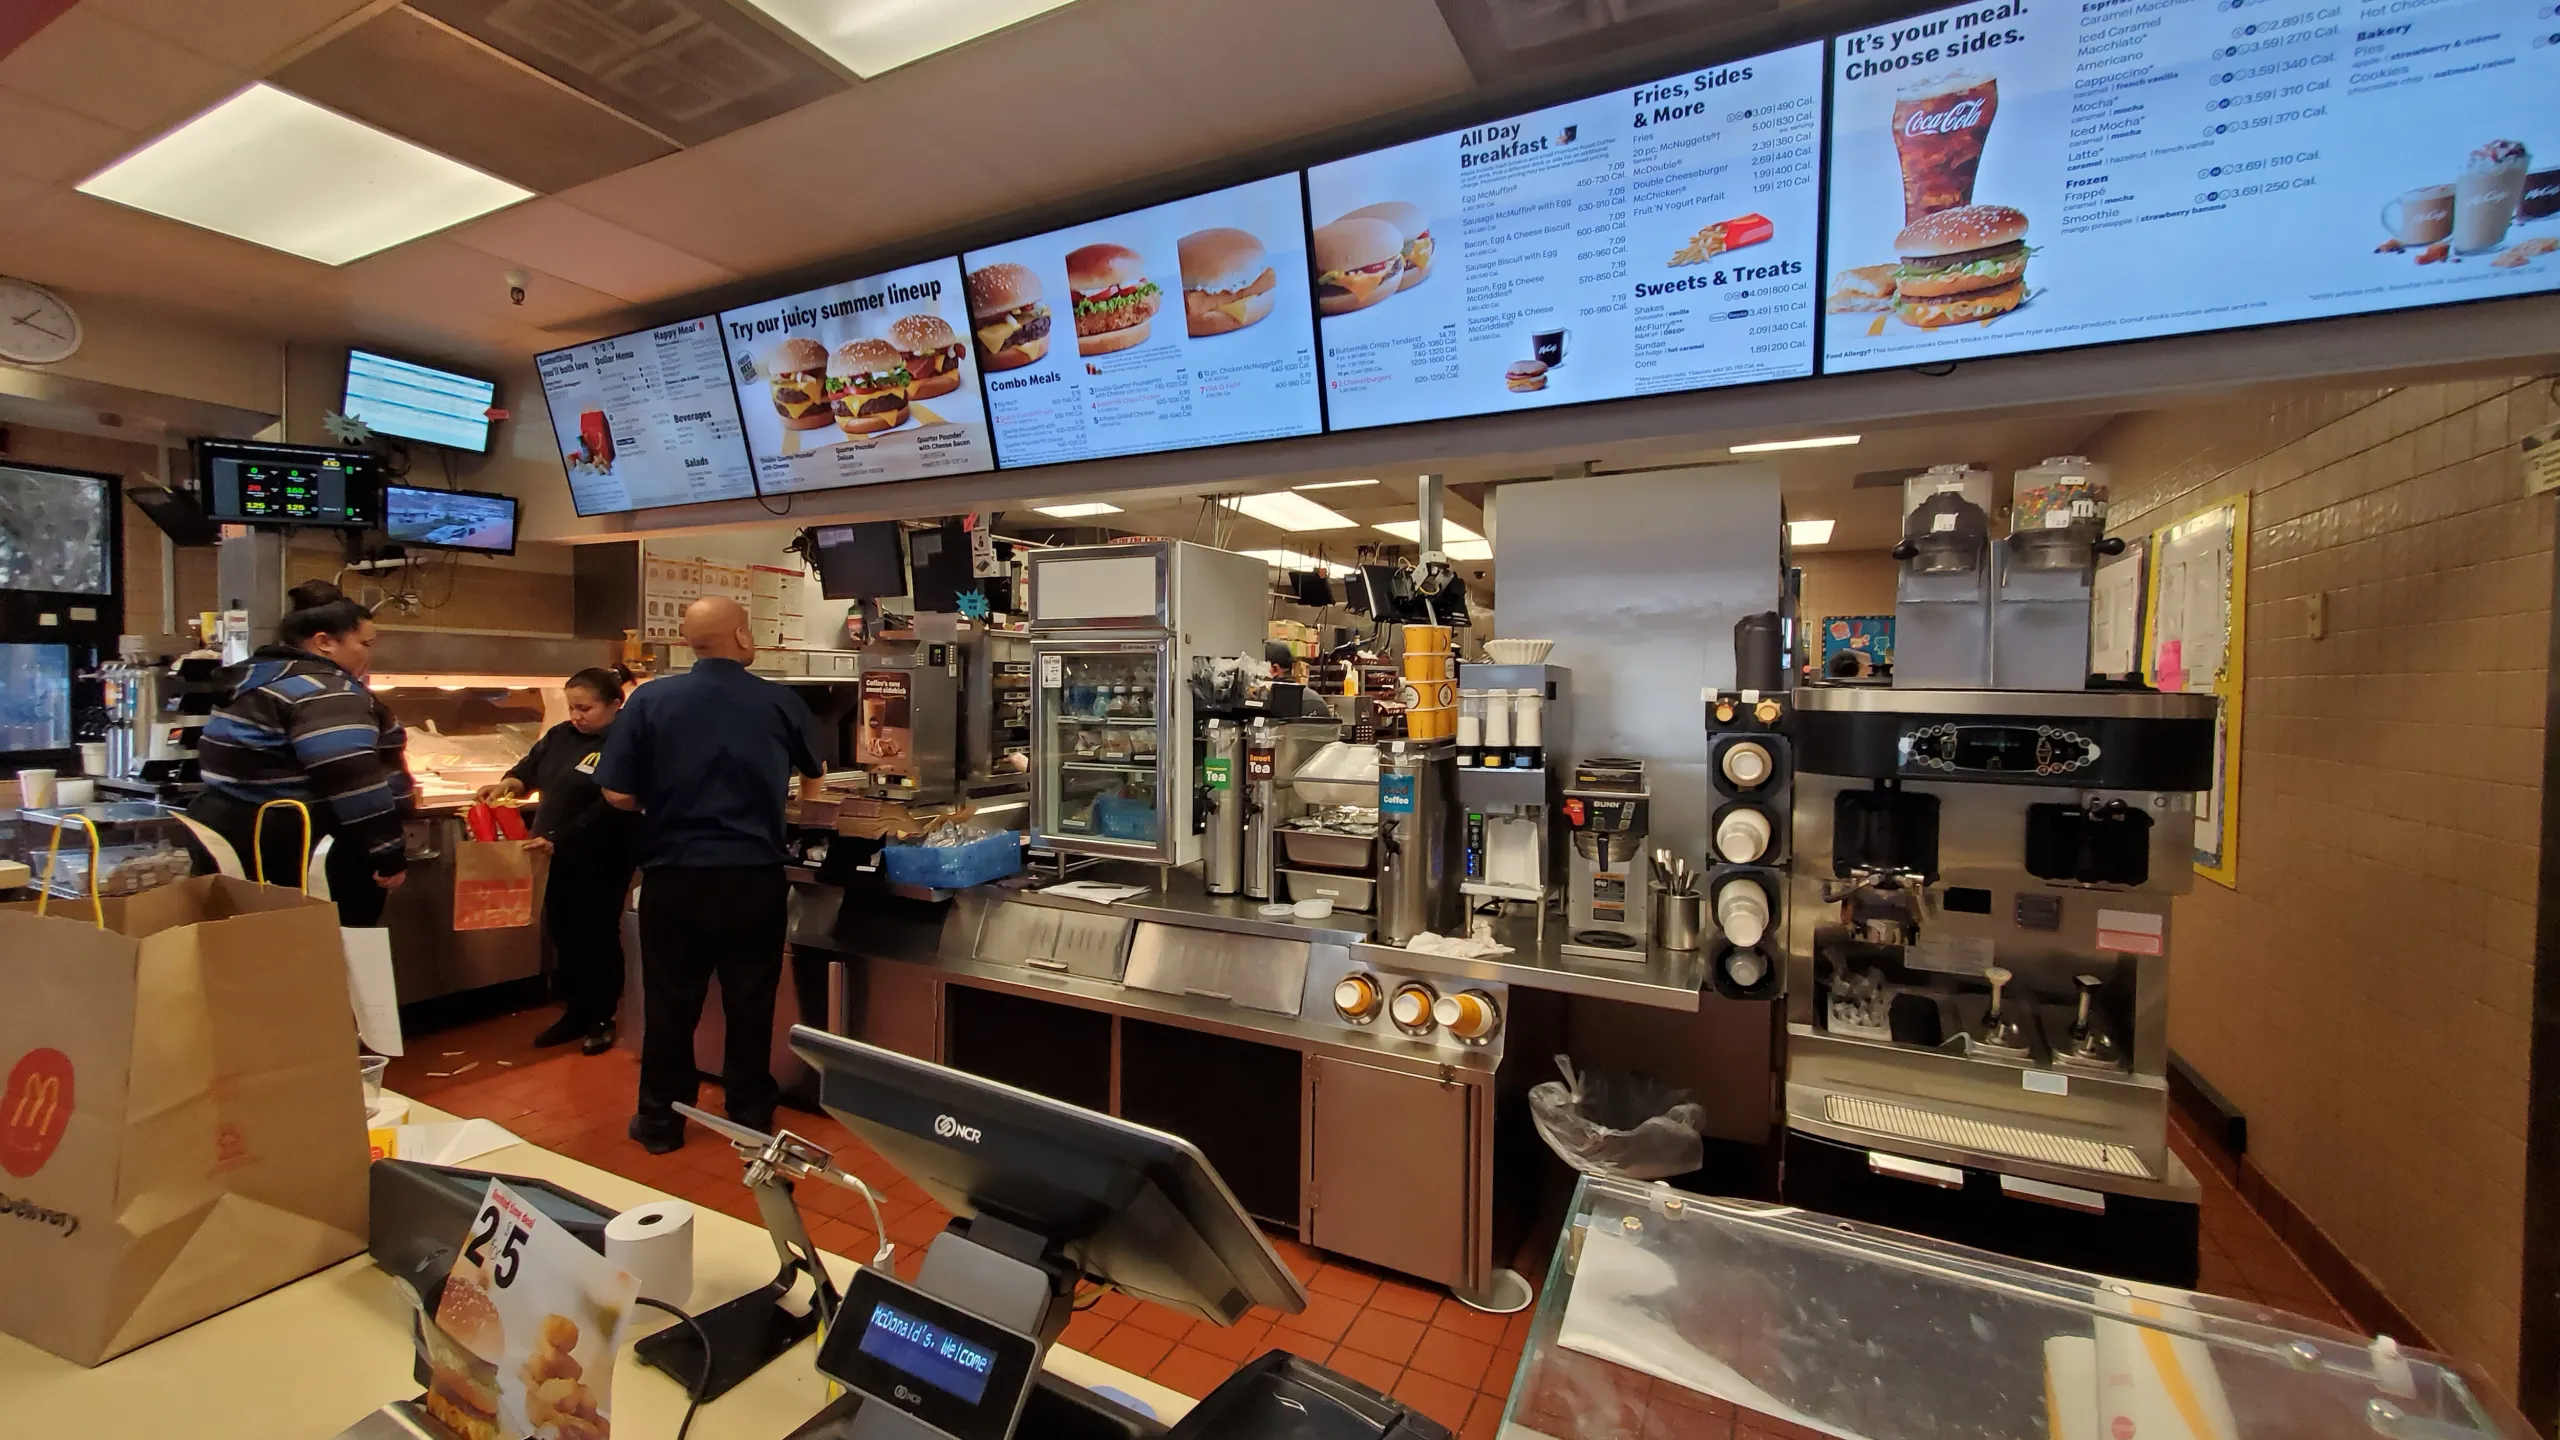 California Increased the Fast Food Minimum Wage, Therefore Some Restaurants Are Installing Kiosks